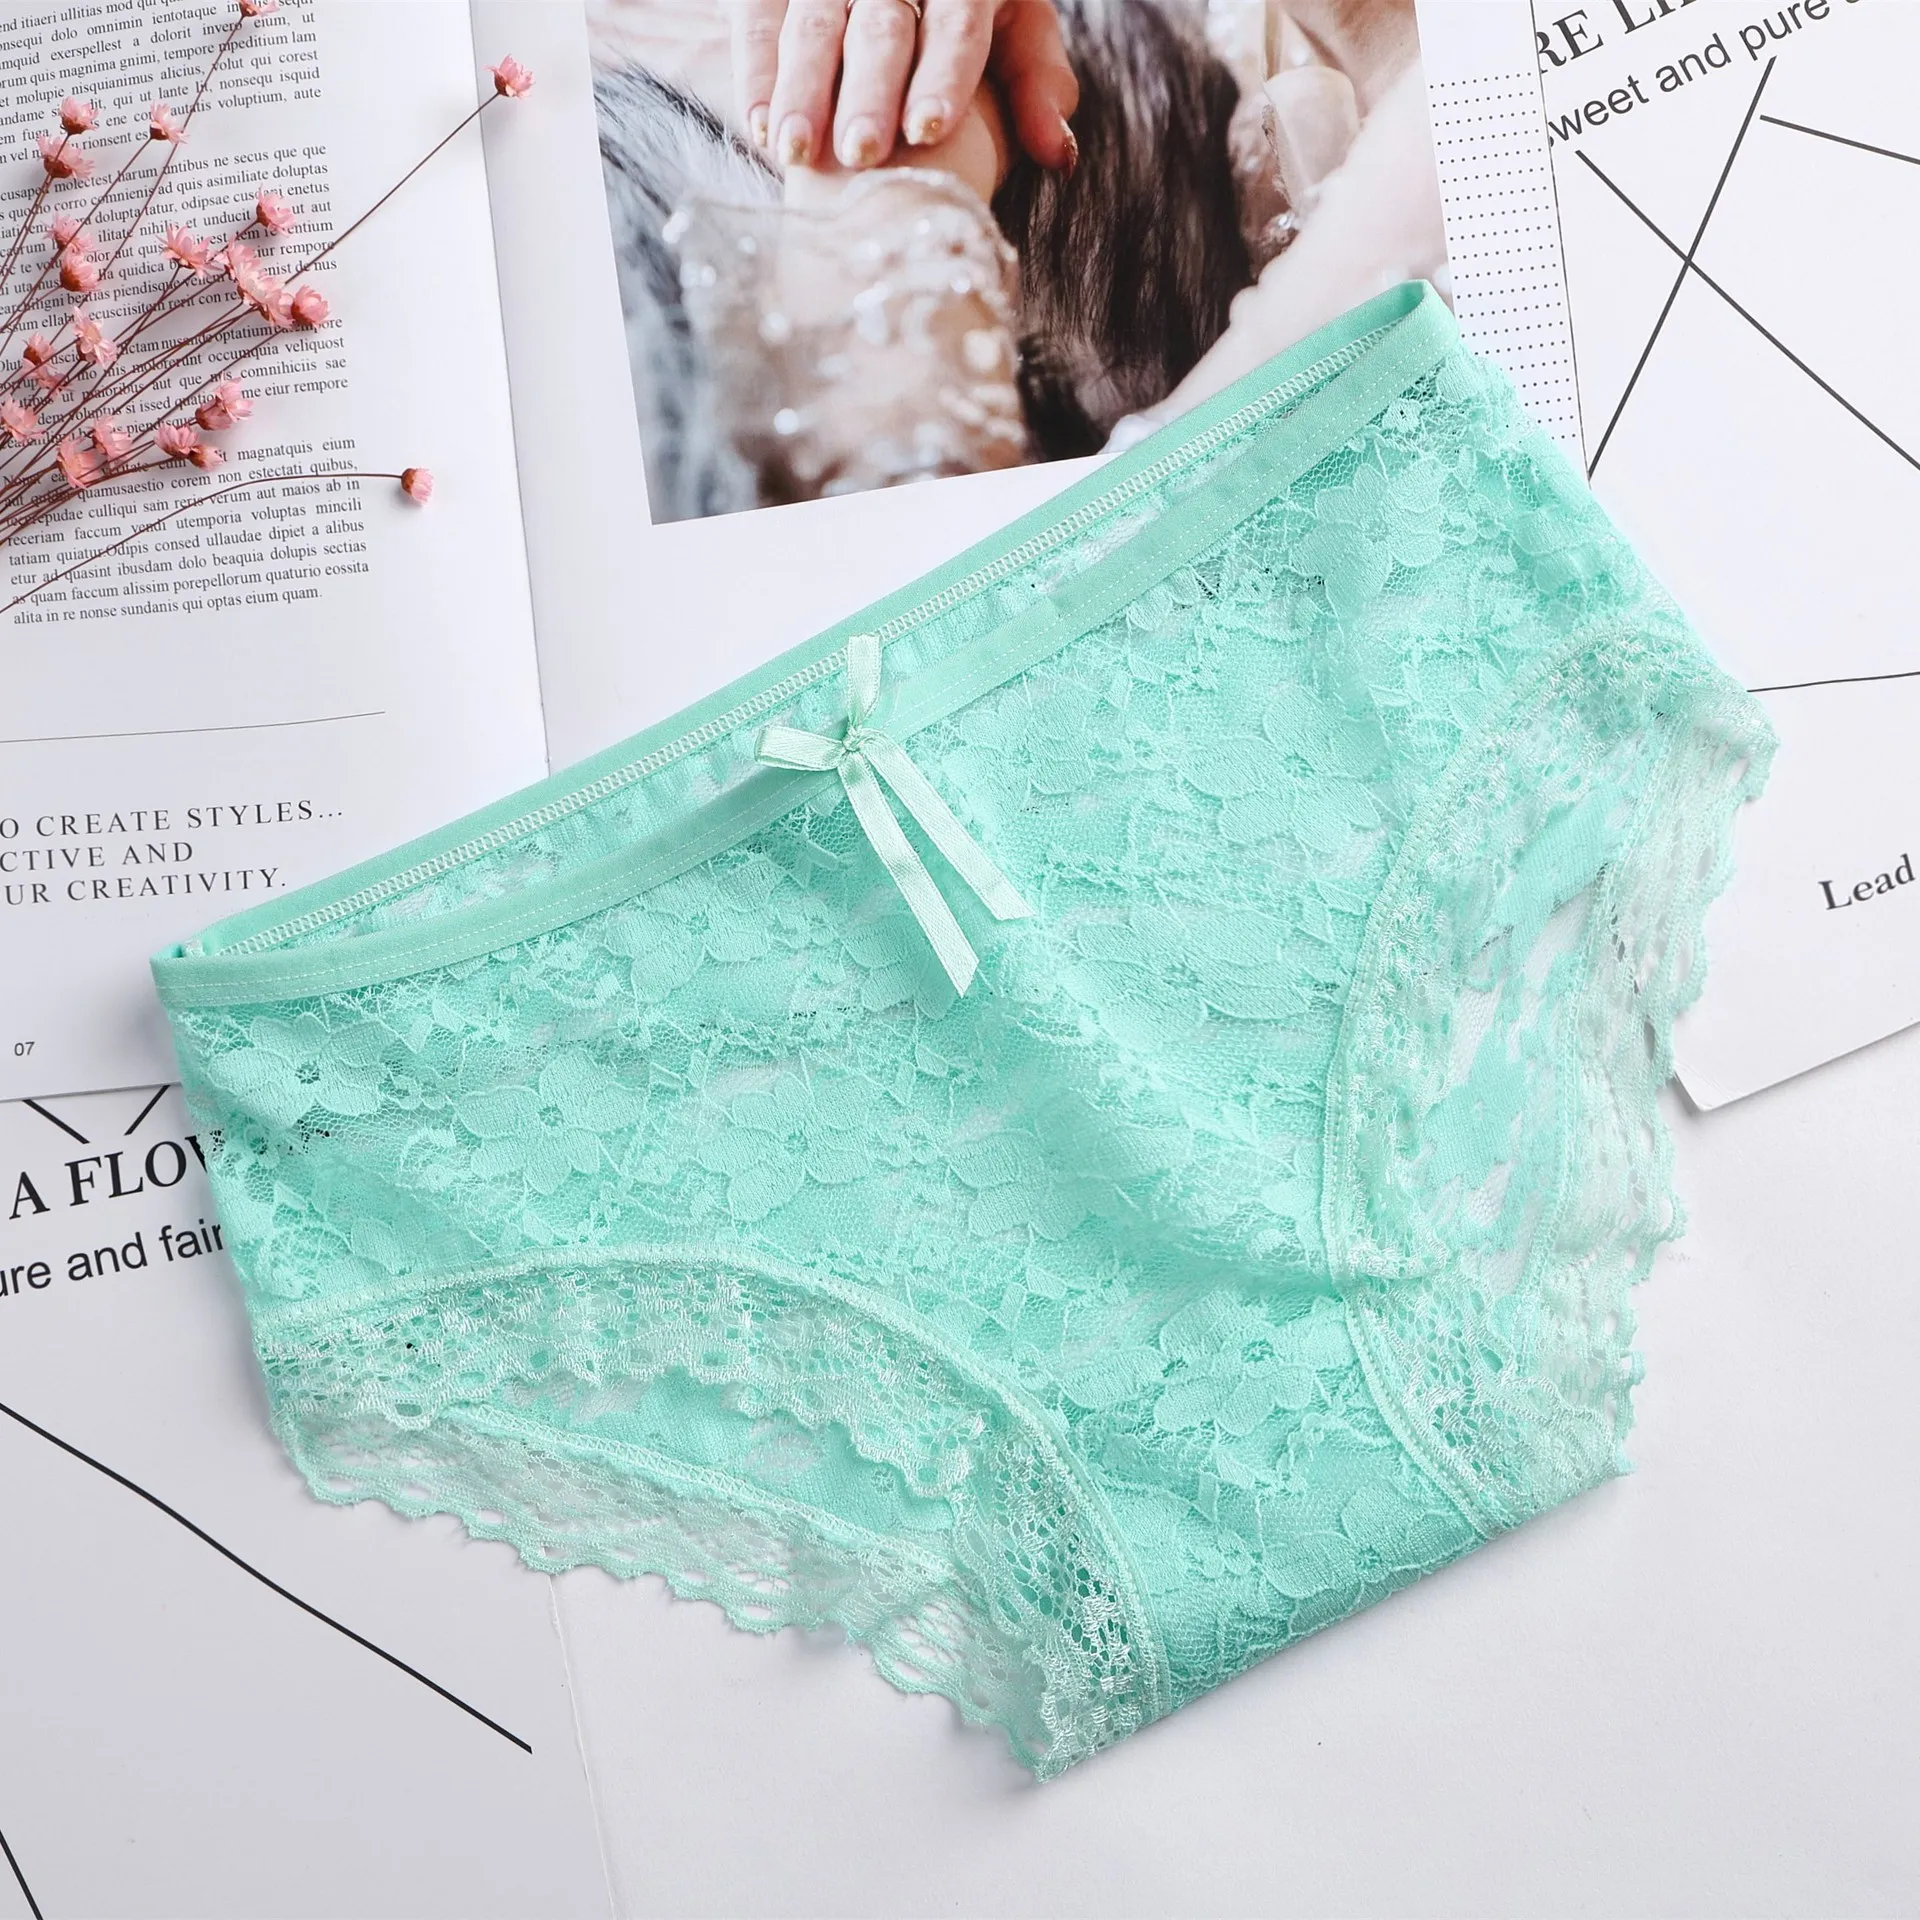 Briefs for Women Lace Cotton Sexy Lingerie Panties Girls Underwear Solid Color Bow Tie Underpants Ladies Panty Calcinha - Color: Shake the green